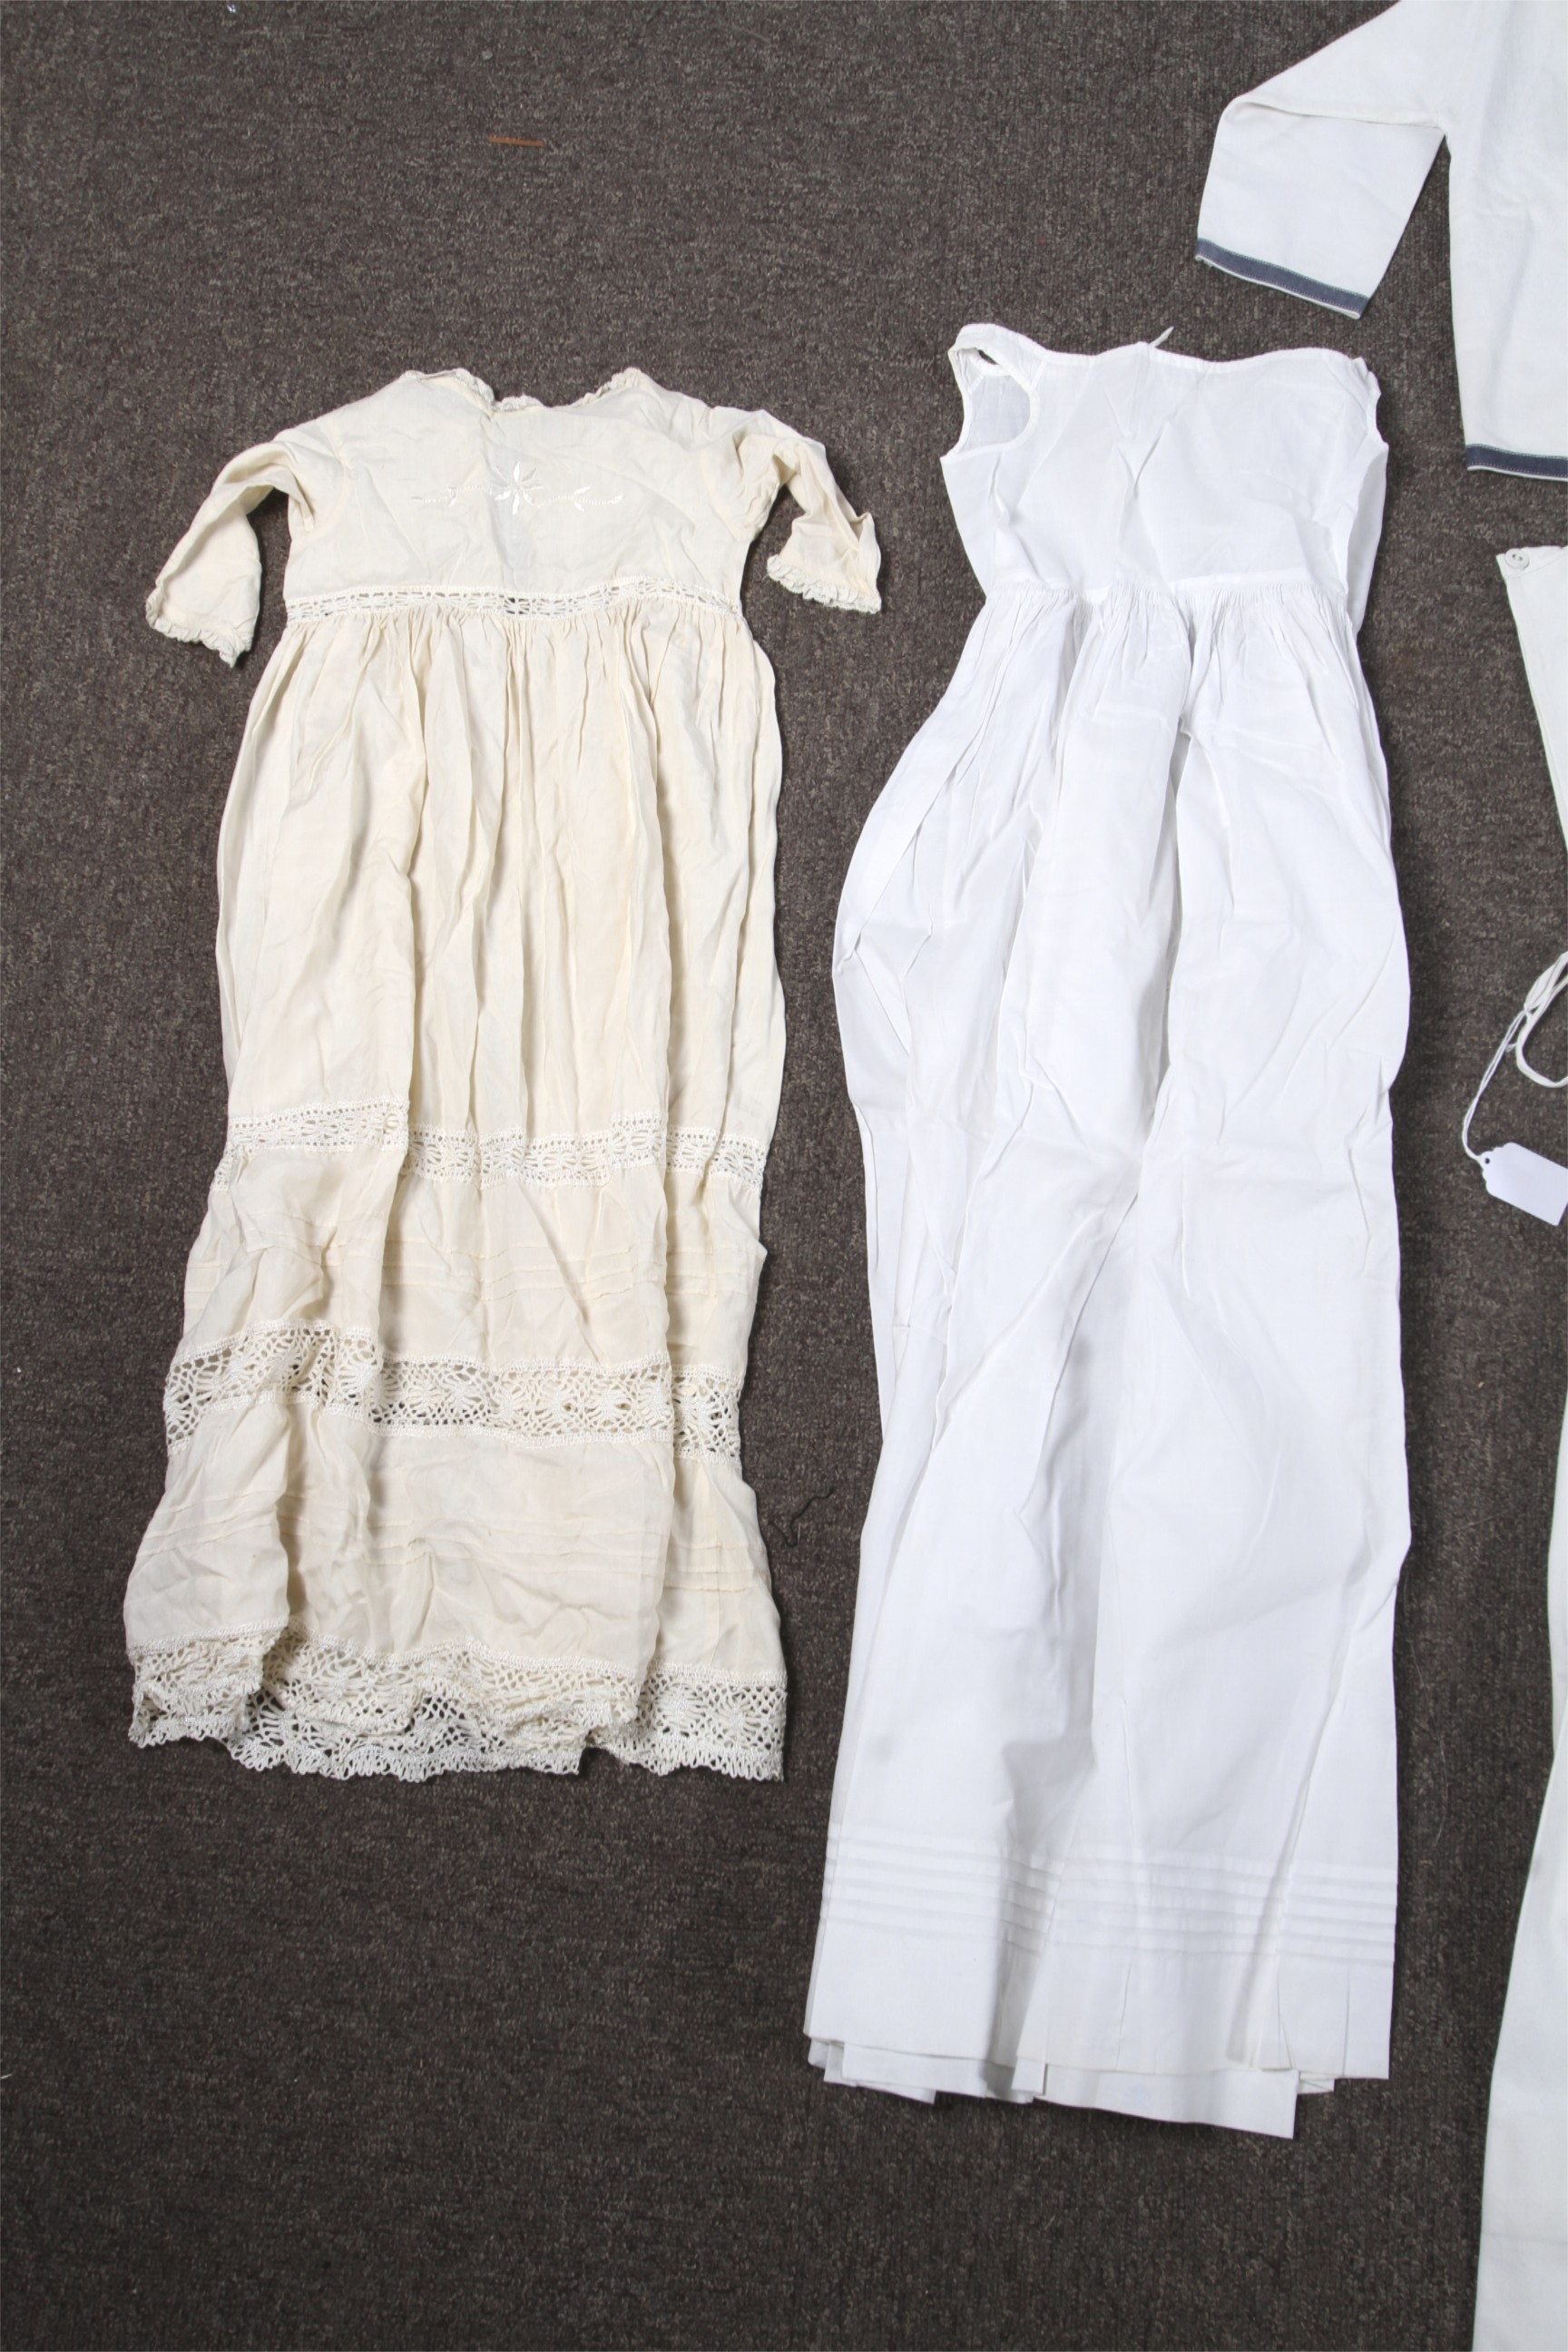 A selection of children's vintage clothing. - Image 2 of 4